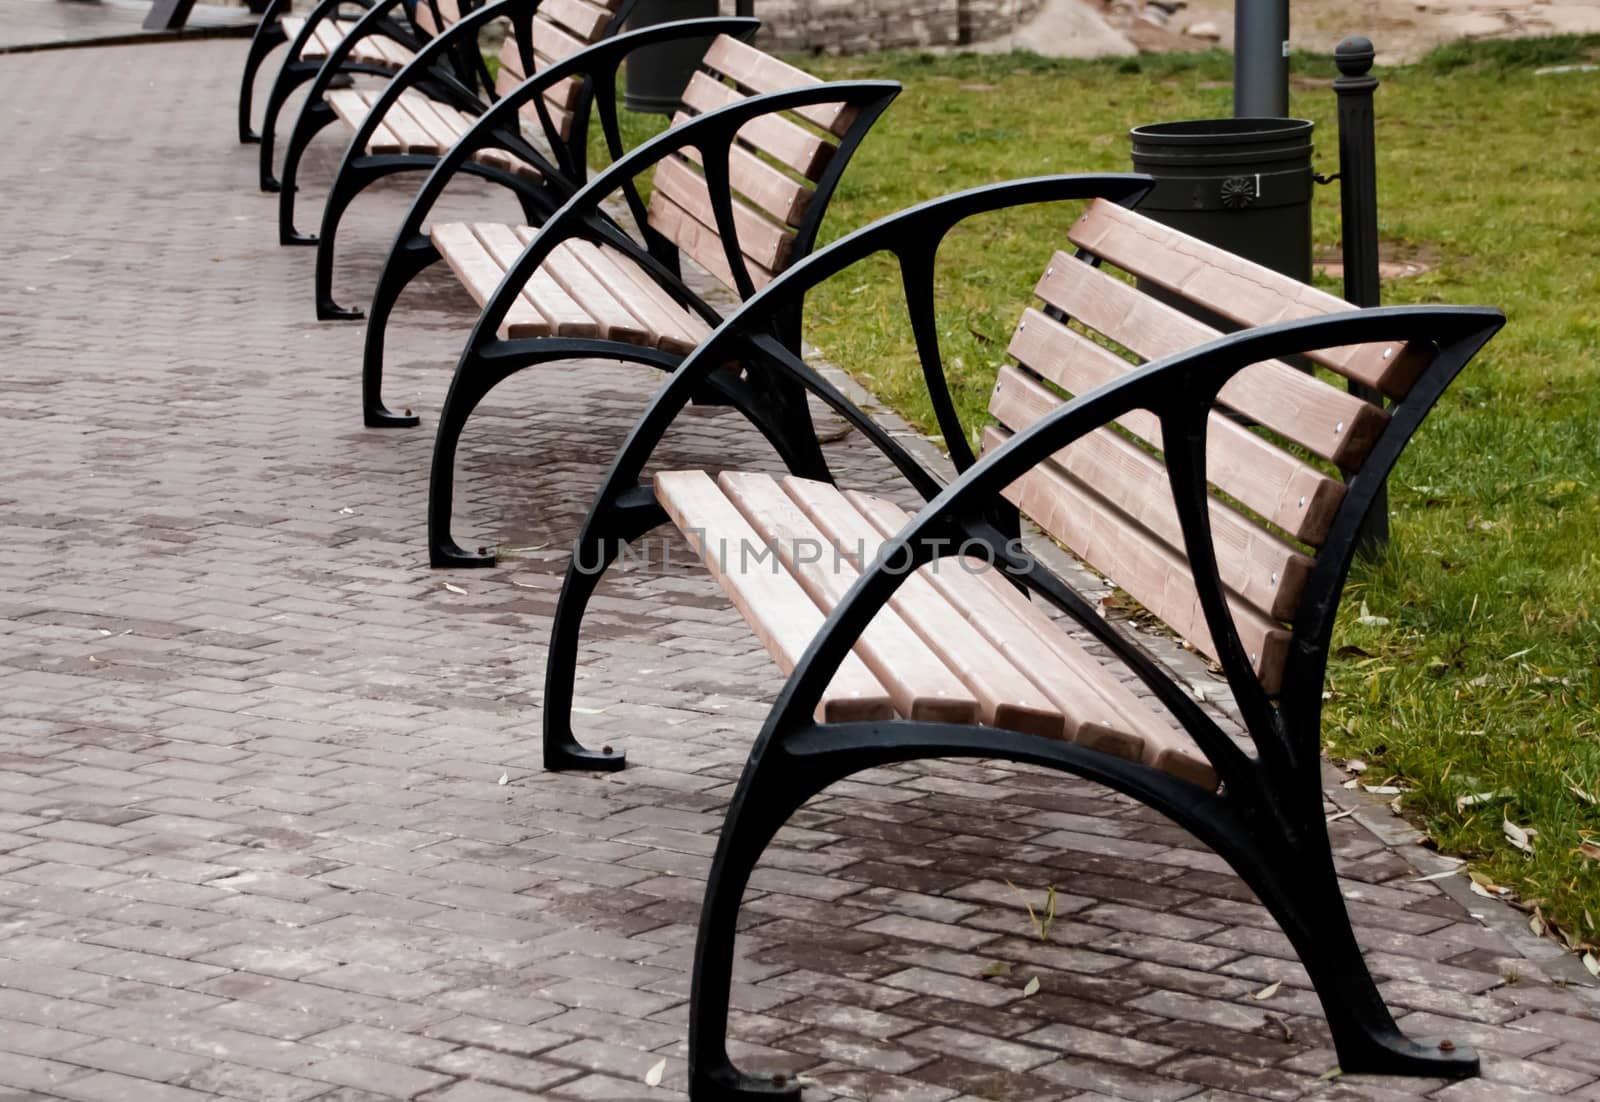  wooden bench in the city park by alexx60